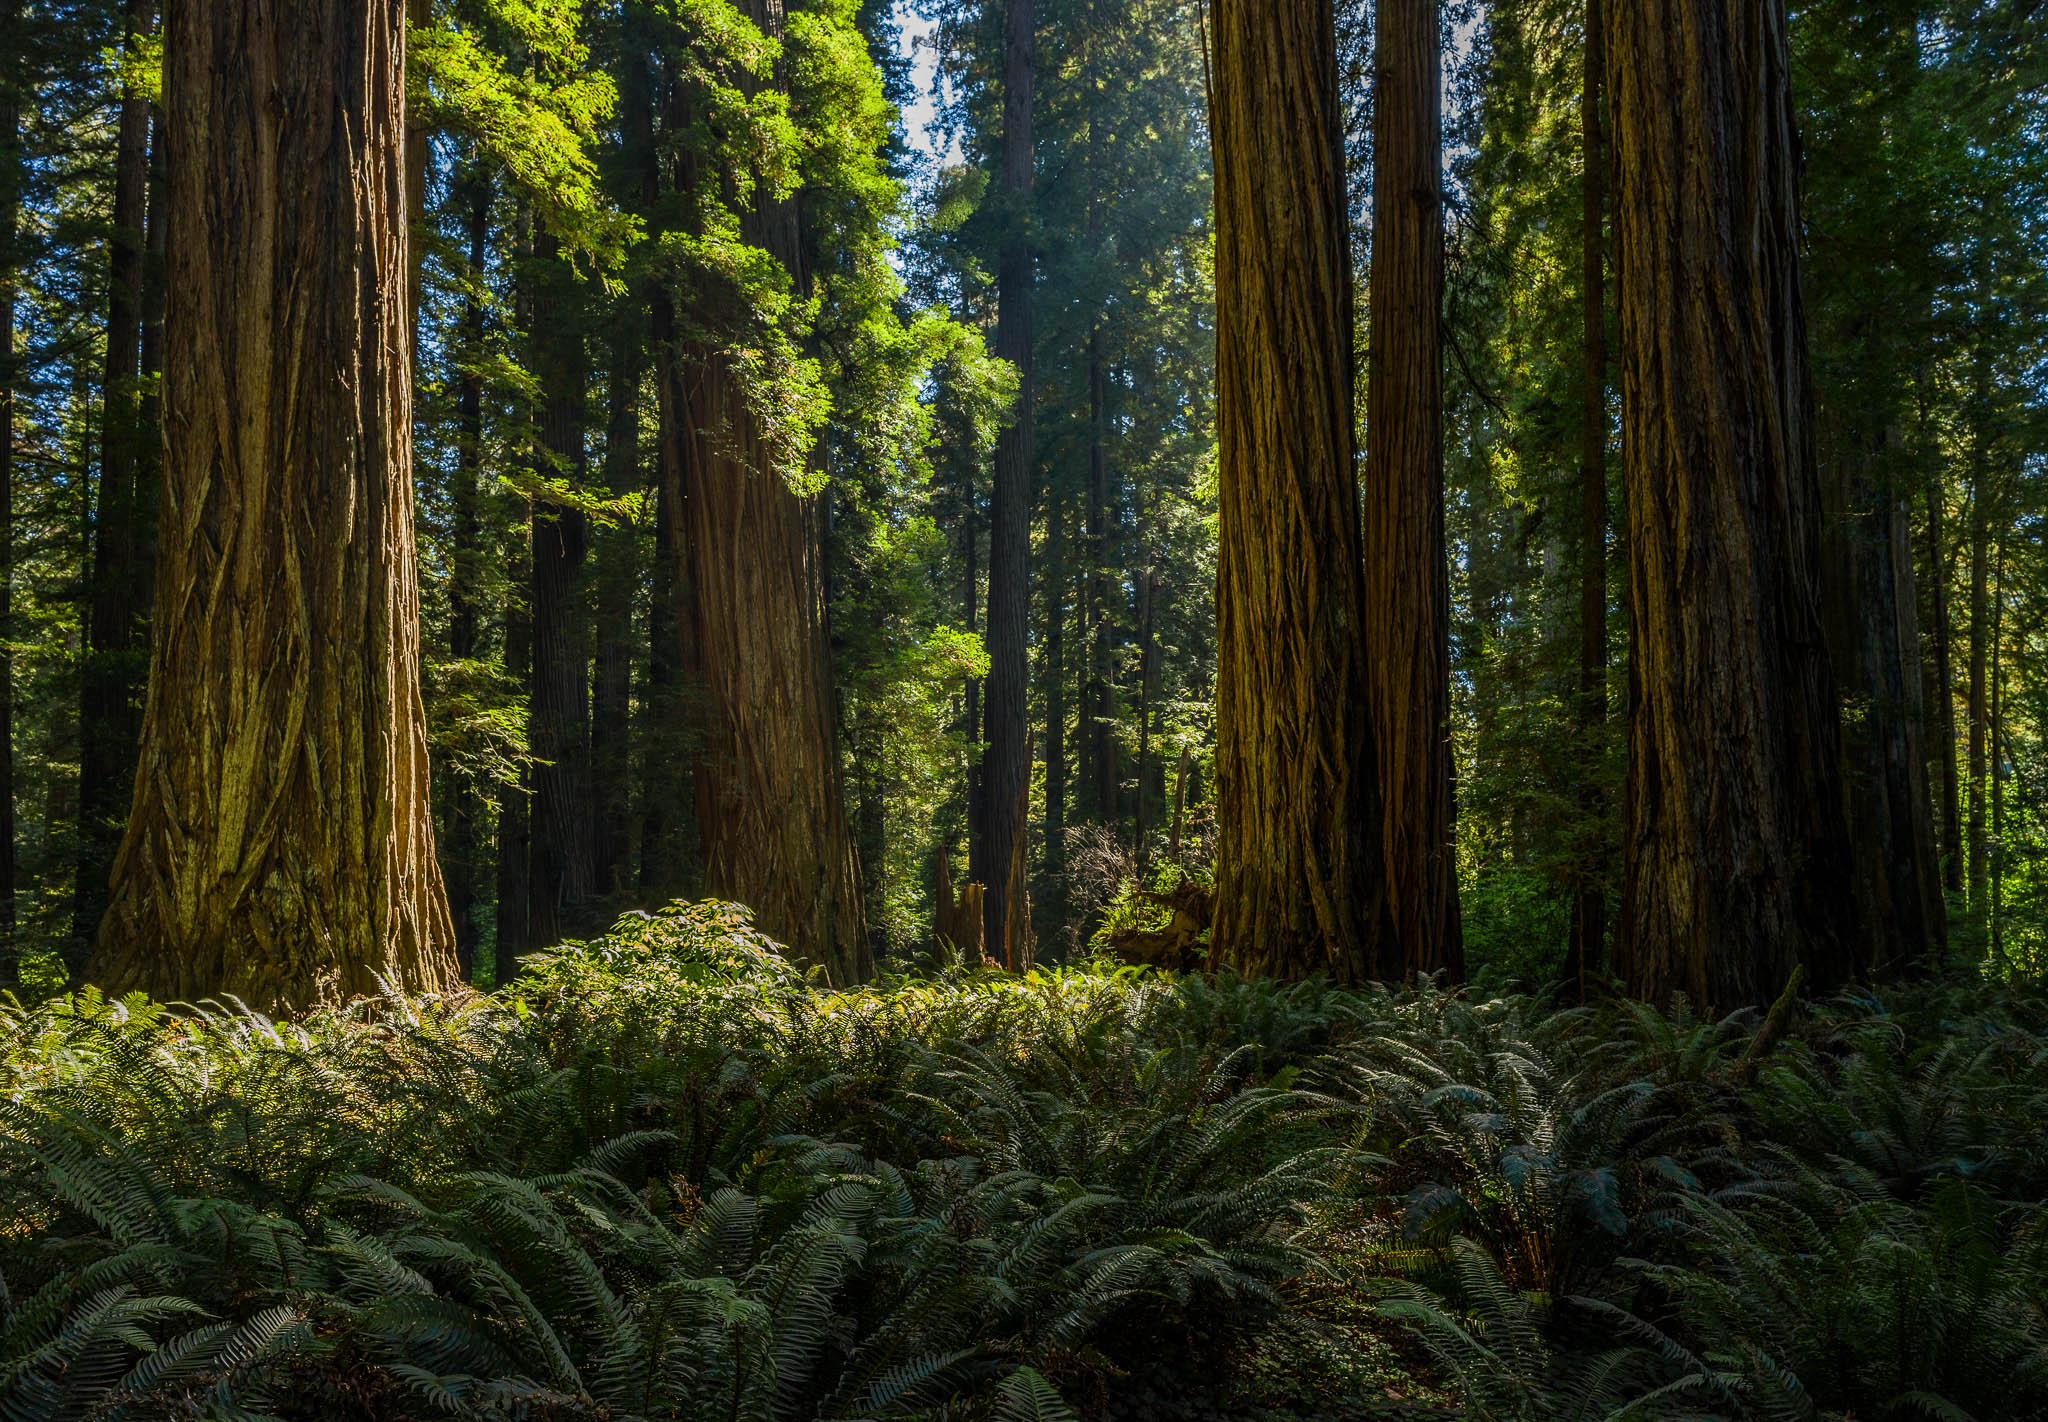 Ground level image of Redwood Trees with the sun shining on the bark and ferns covering the ground.